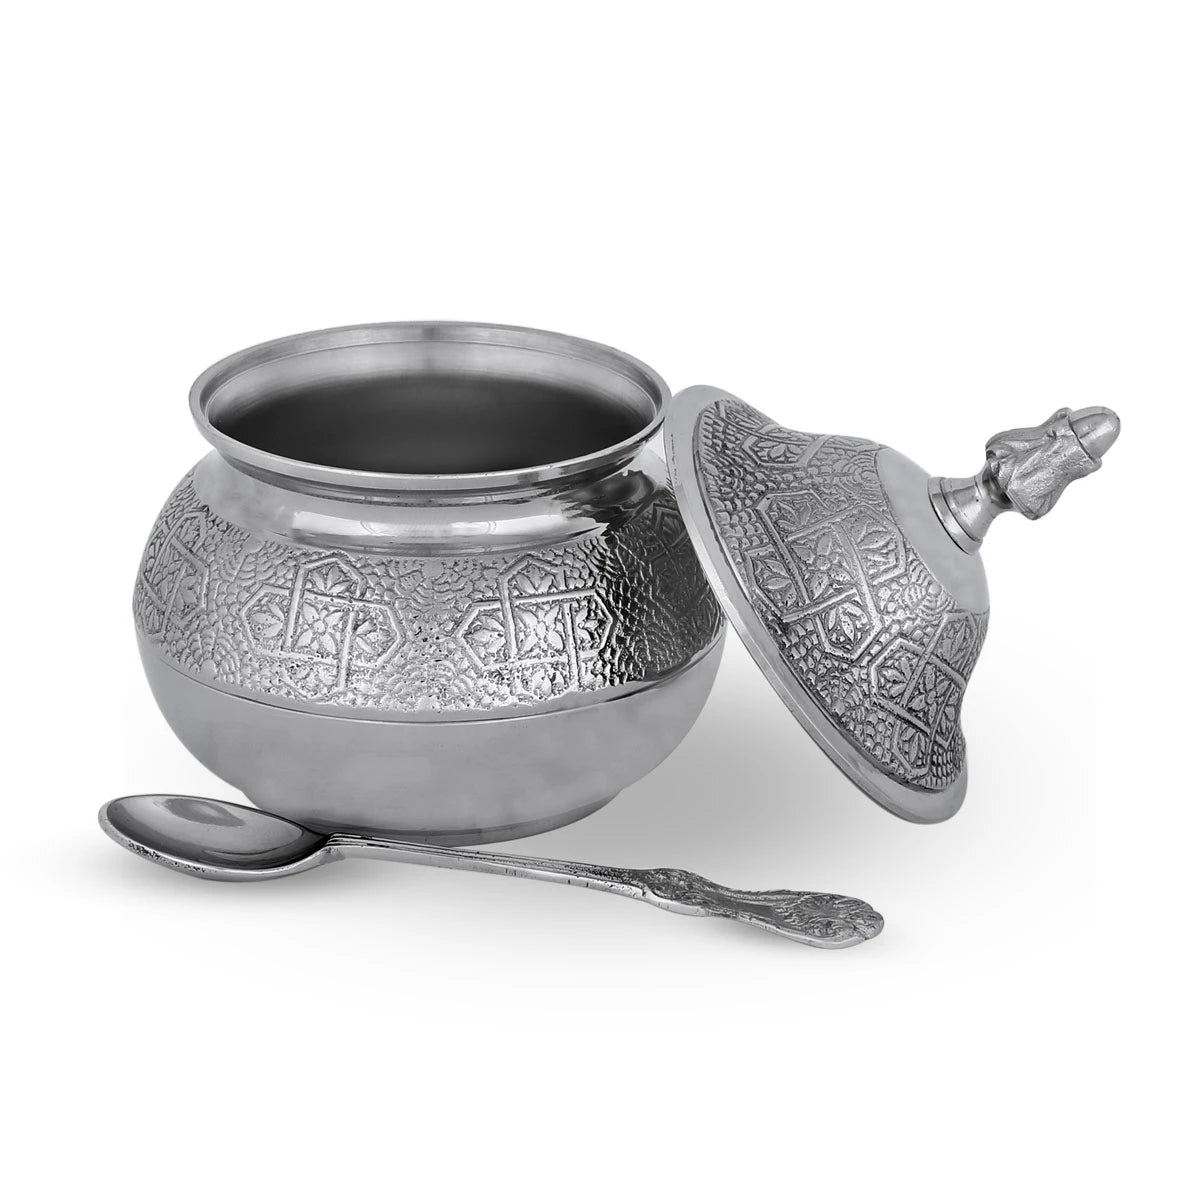 Front View of Moroccan Sugar Bowl